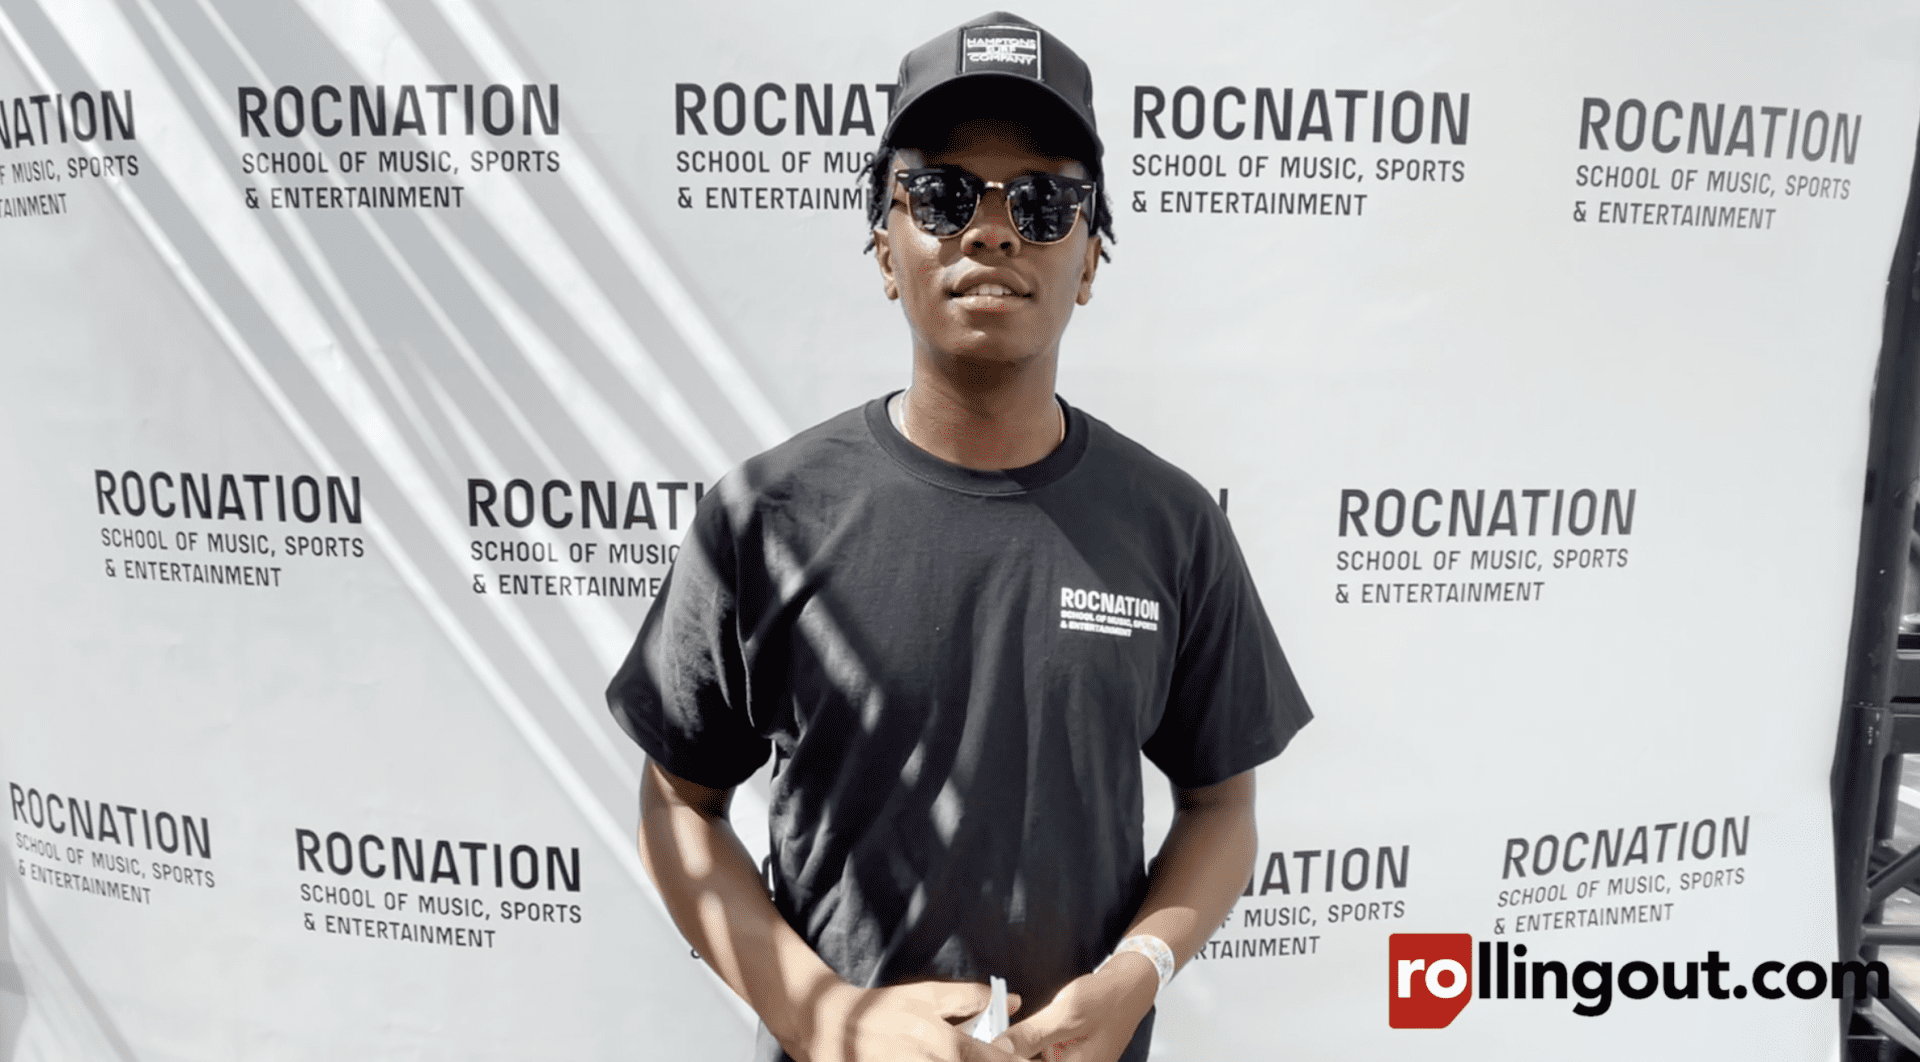 Justin Williams shares how Roc Nation supports the next generation of creators